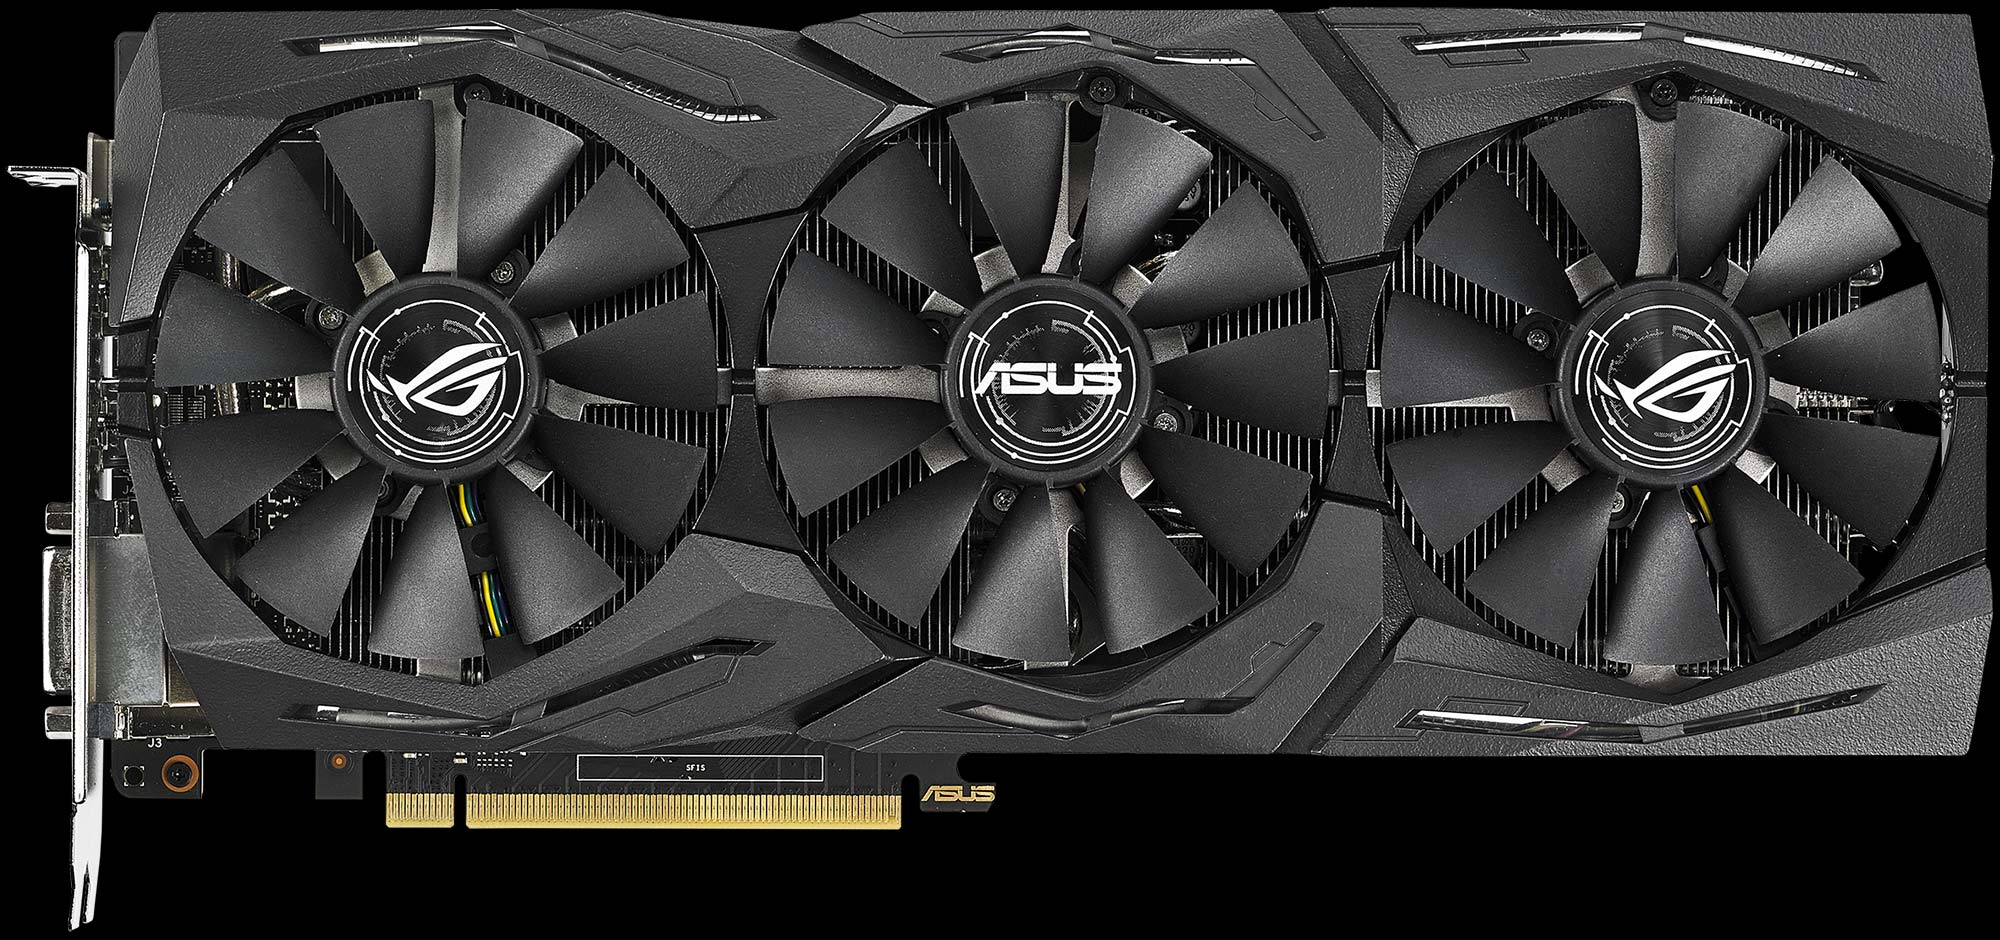 ROG Strix supersizes the GeForce GTX 1070 Ti graphics card | ROG - Republic  of Gamers Global